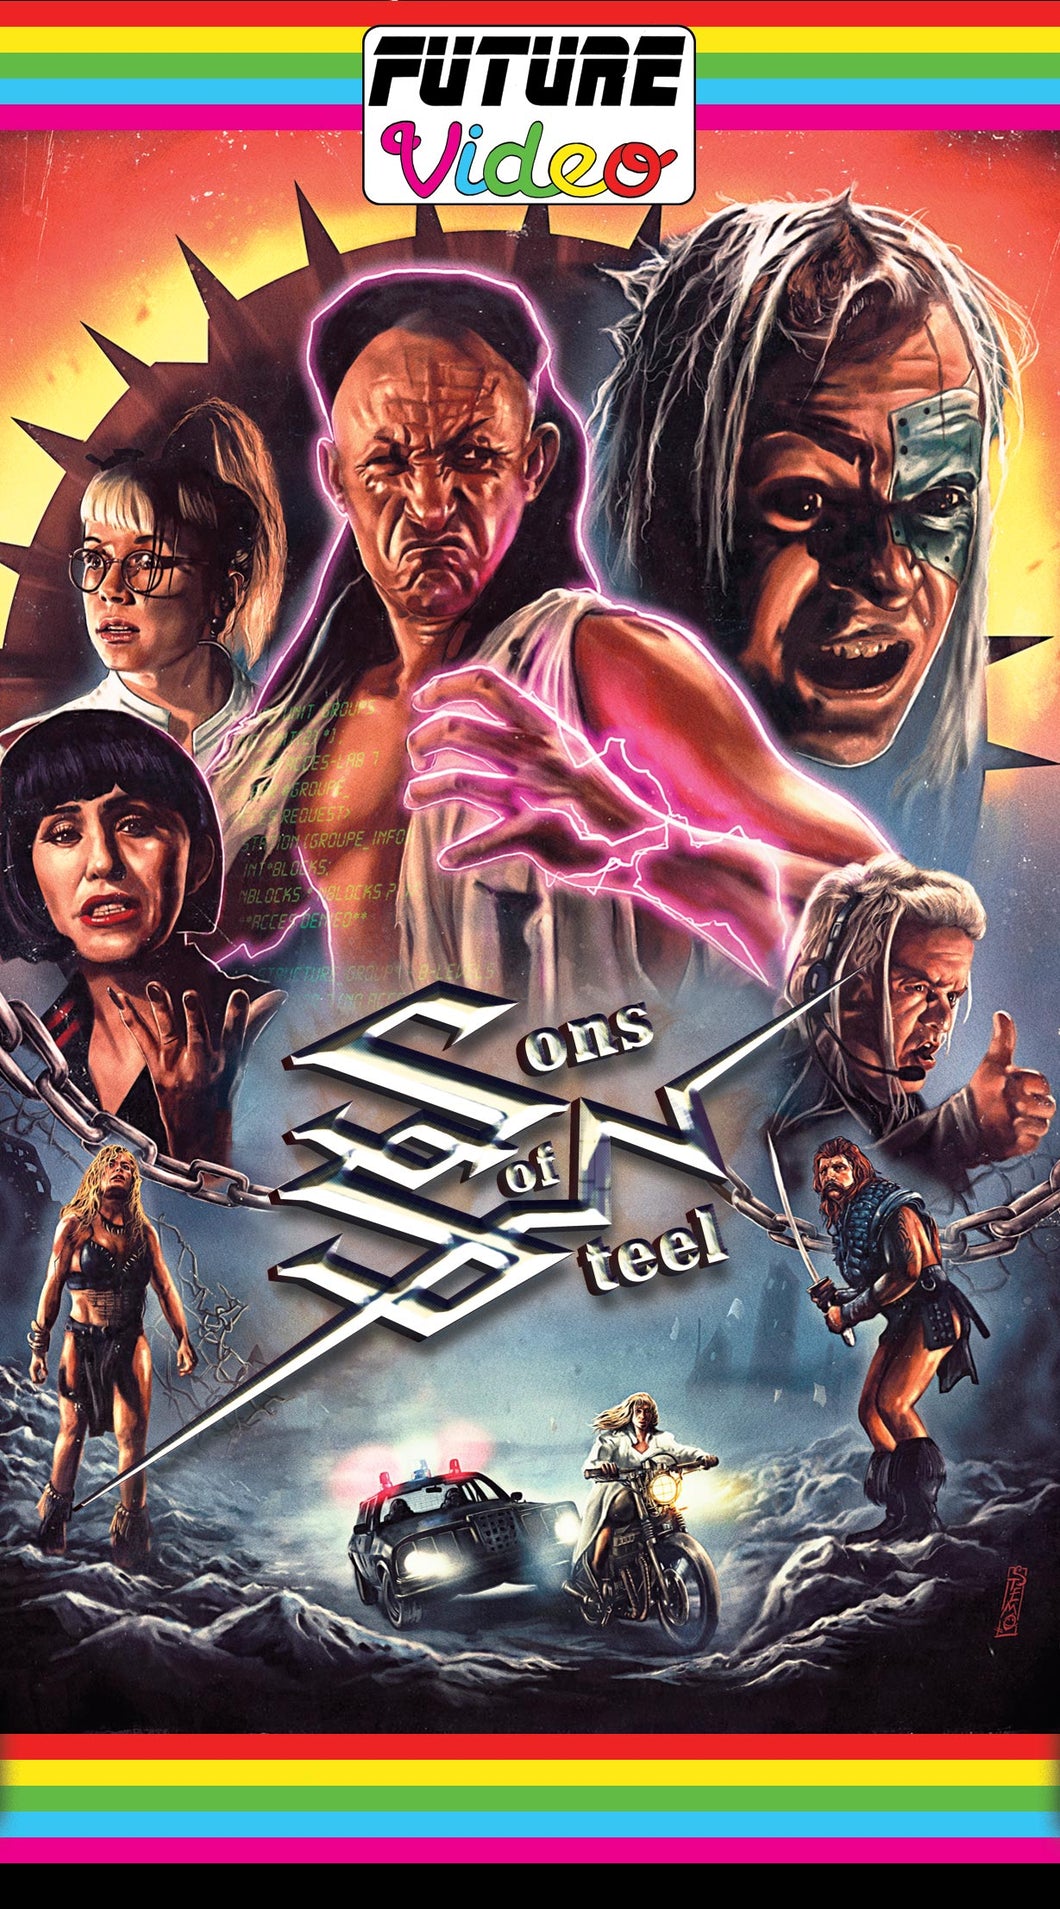 Sons of Steel [VHS + POSTER]